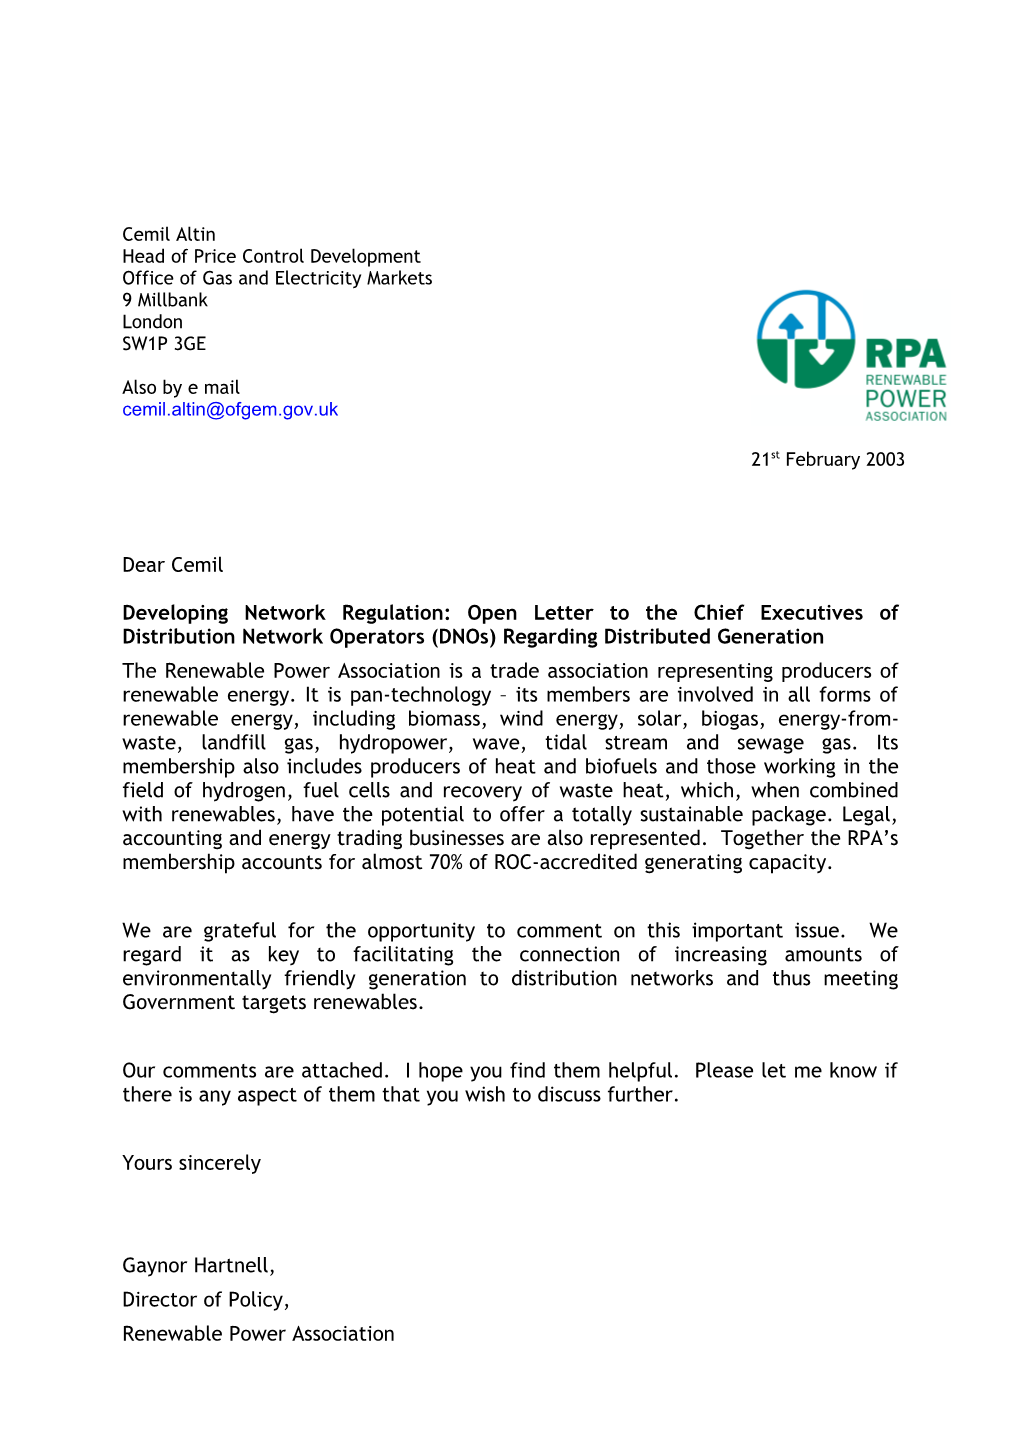 Renewable Power Association - Developing Network Regulation: Open Letter to the Chief Executives